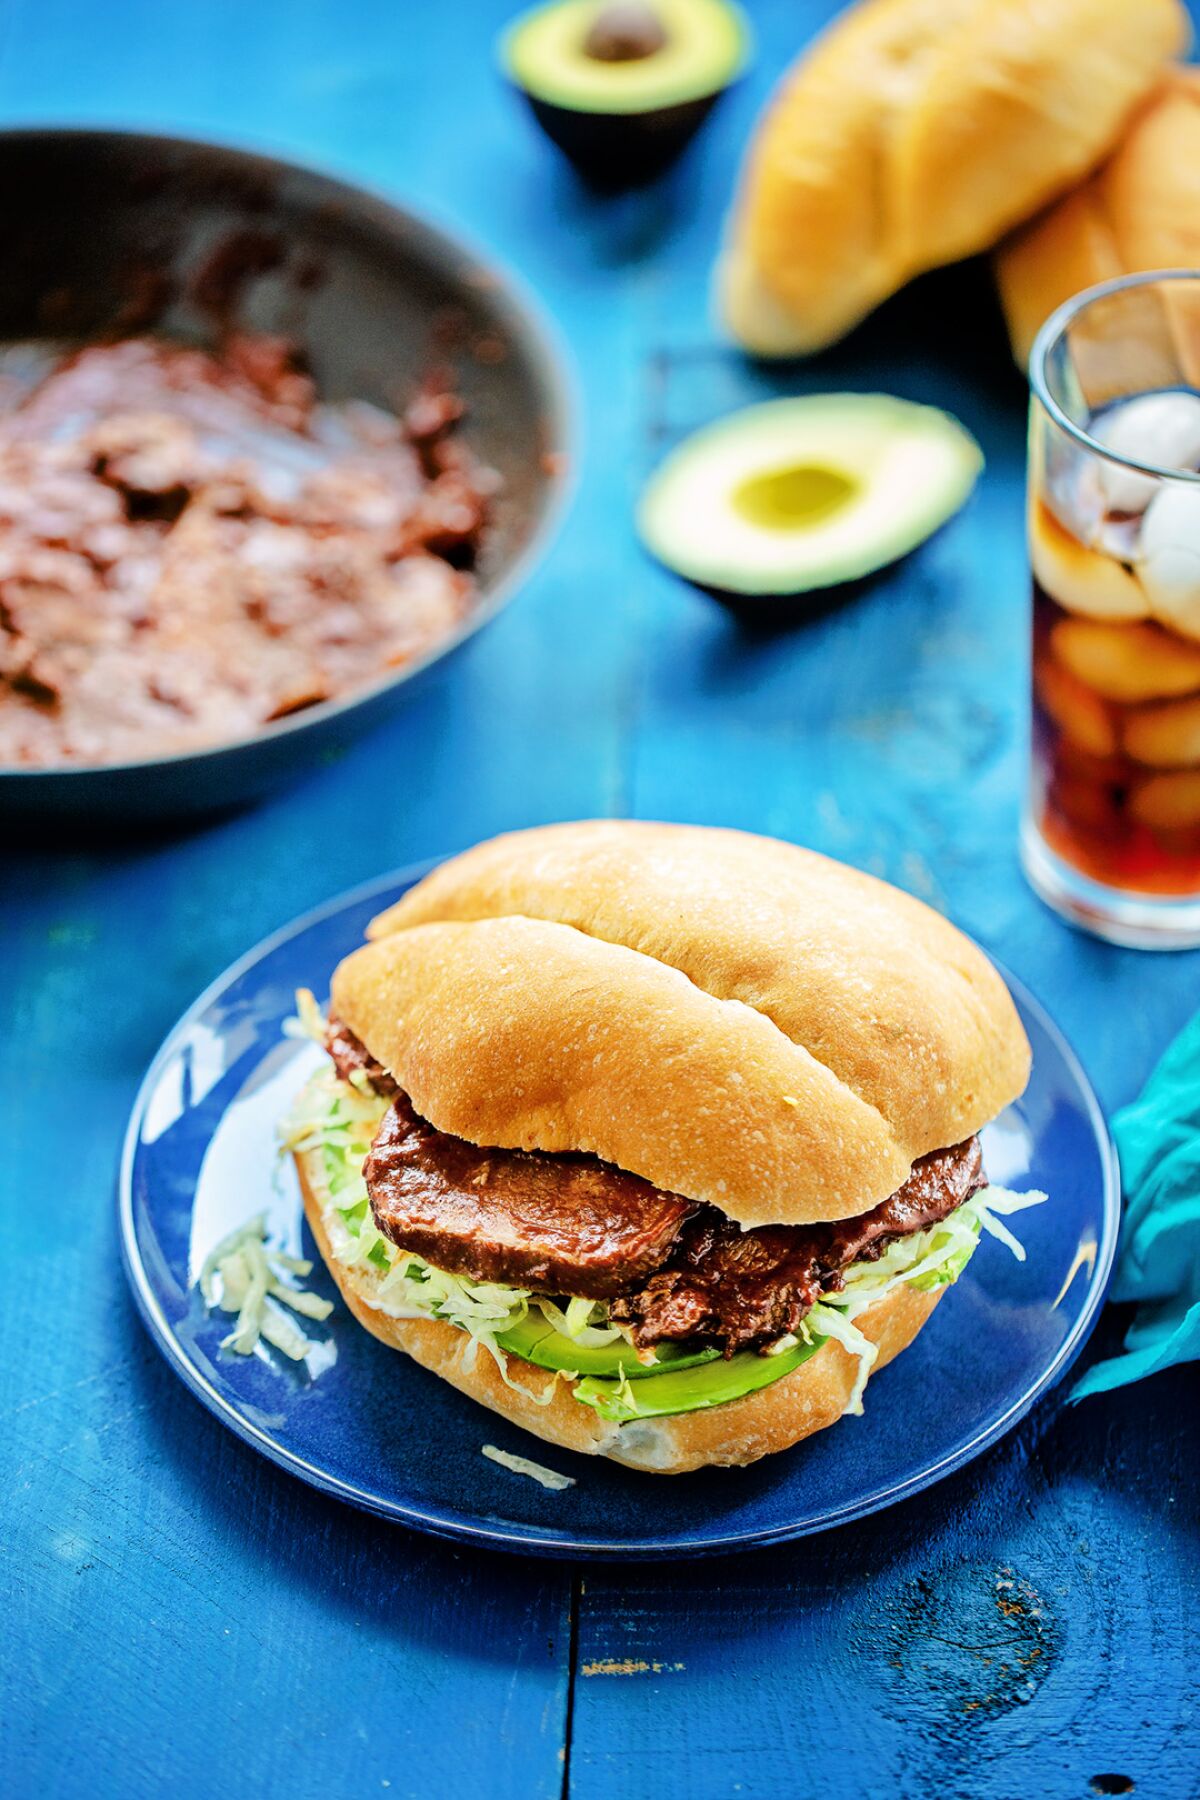 Lengua tortas (Mexican sandwiches) are great for a late lunch or early dinner paired with a crisp side salad.